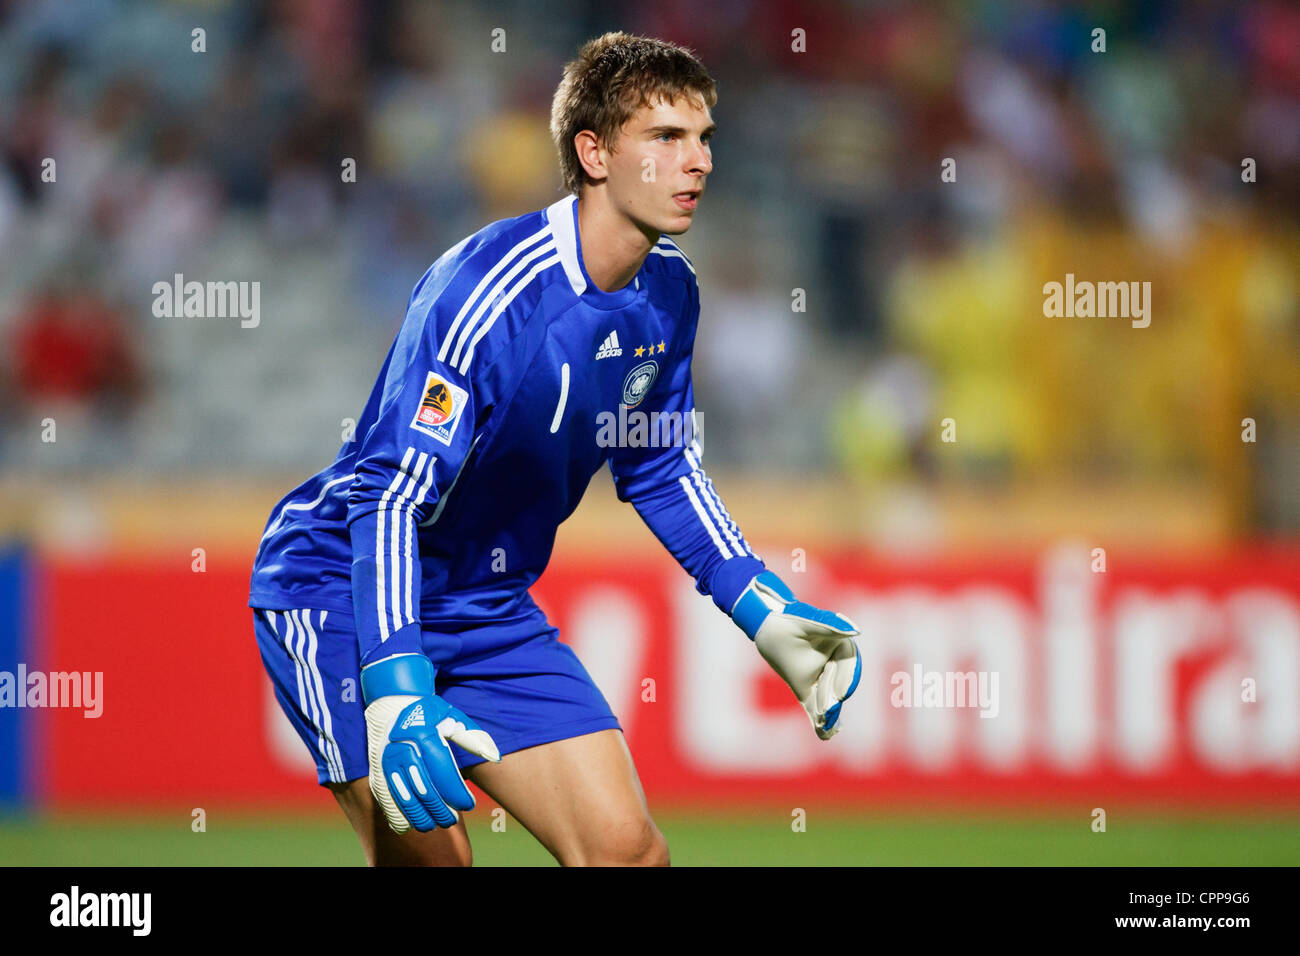 Germany goalkeeper Ron-Robert Zieler in action during a FIFA U-20 World Cup quarterfinal match against Brazil. Stock Photo